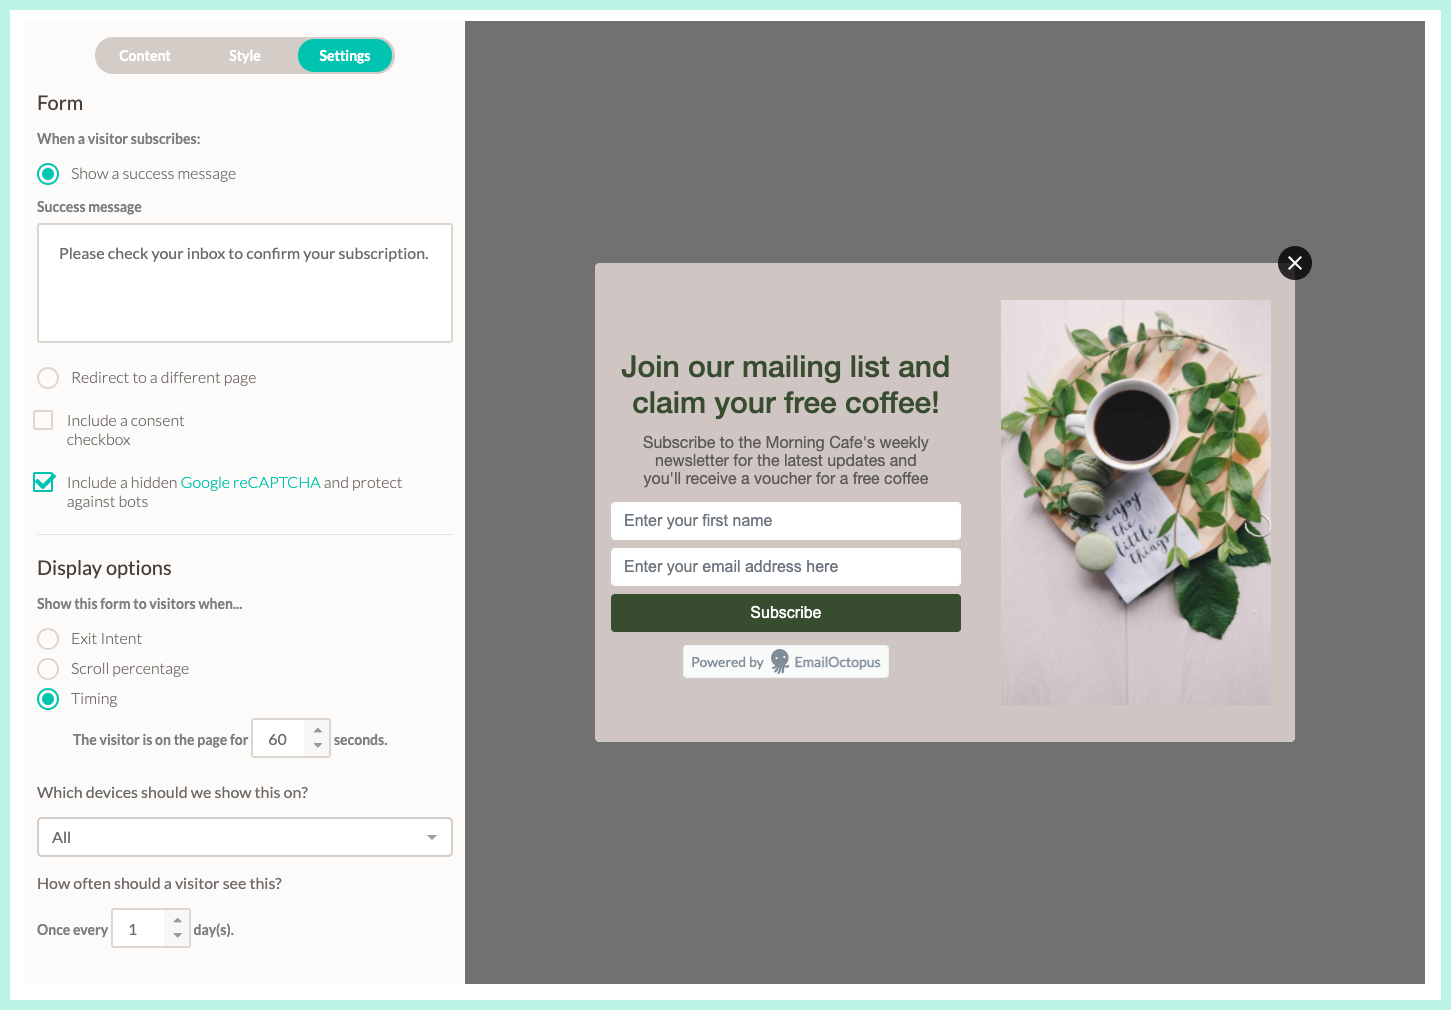 Image of the pop-up form builder in EmailOctopus, a free email marketing tool